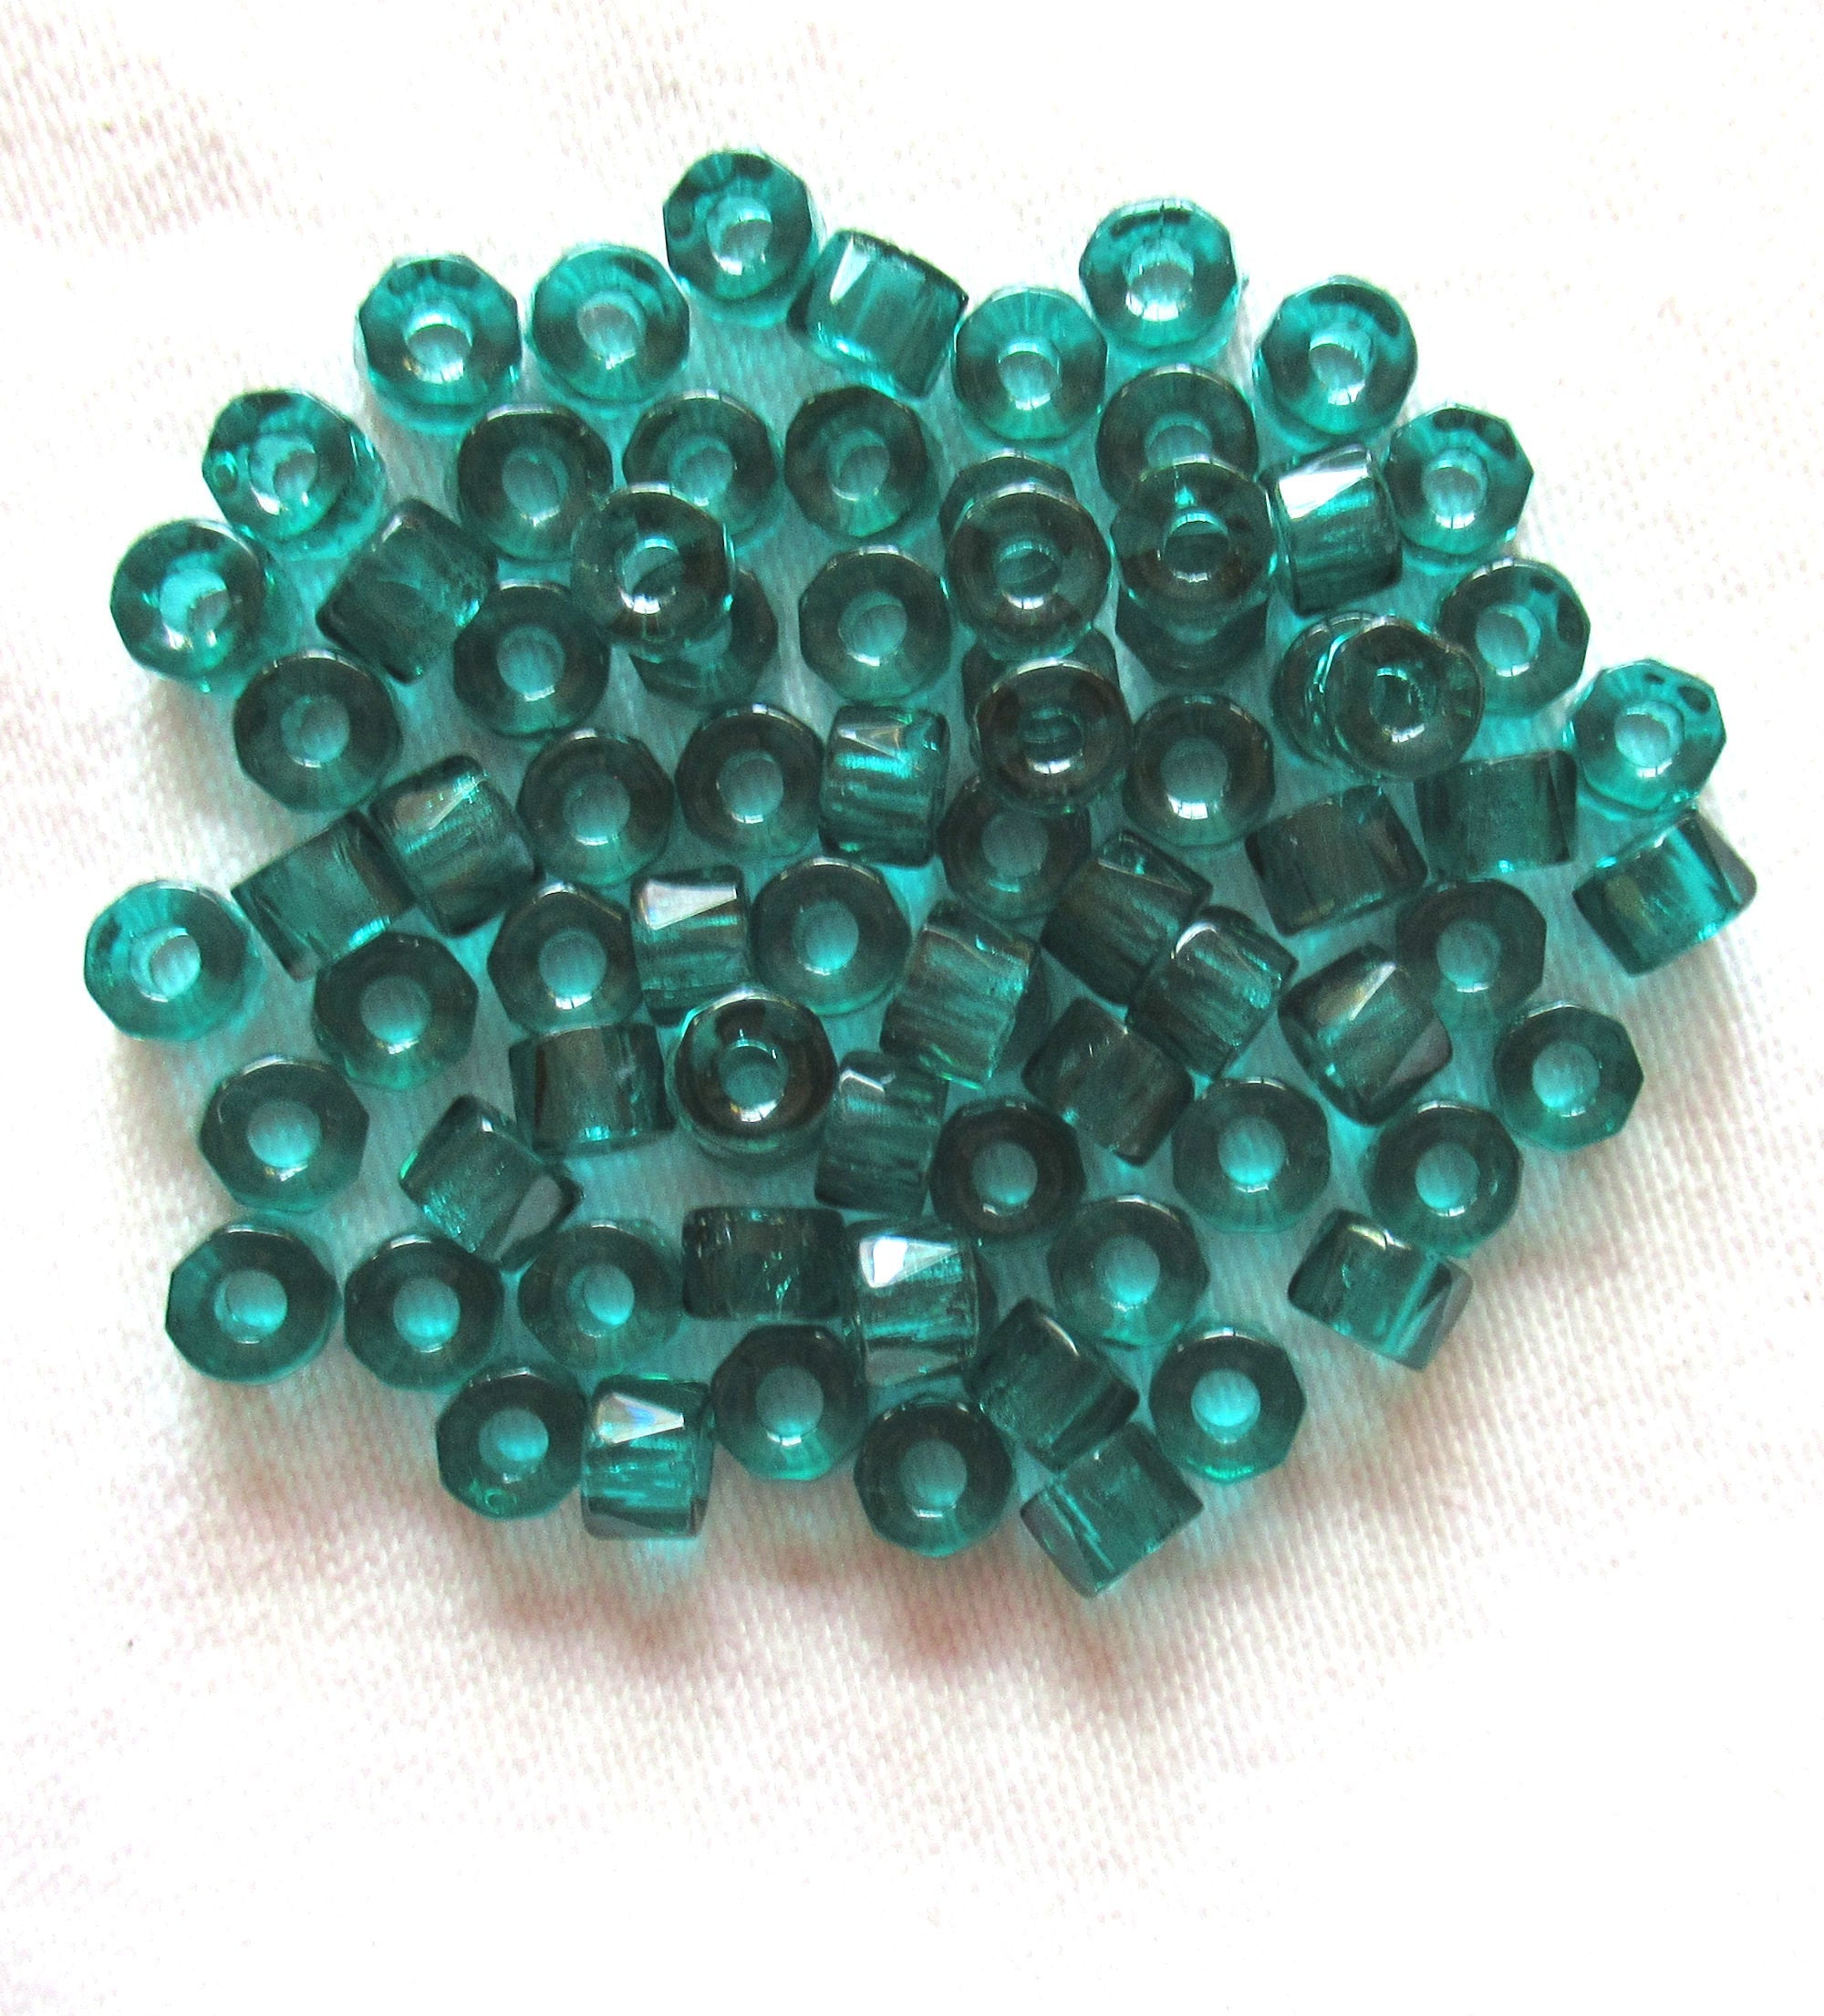 6mm Melon Beads 6mm Czech Glass Beads Large Hole Beads for Jewelry Making  2mm Hole Green Blue Mix With Bronze Wash 50 Beads 